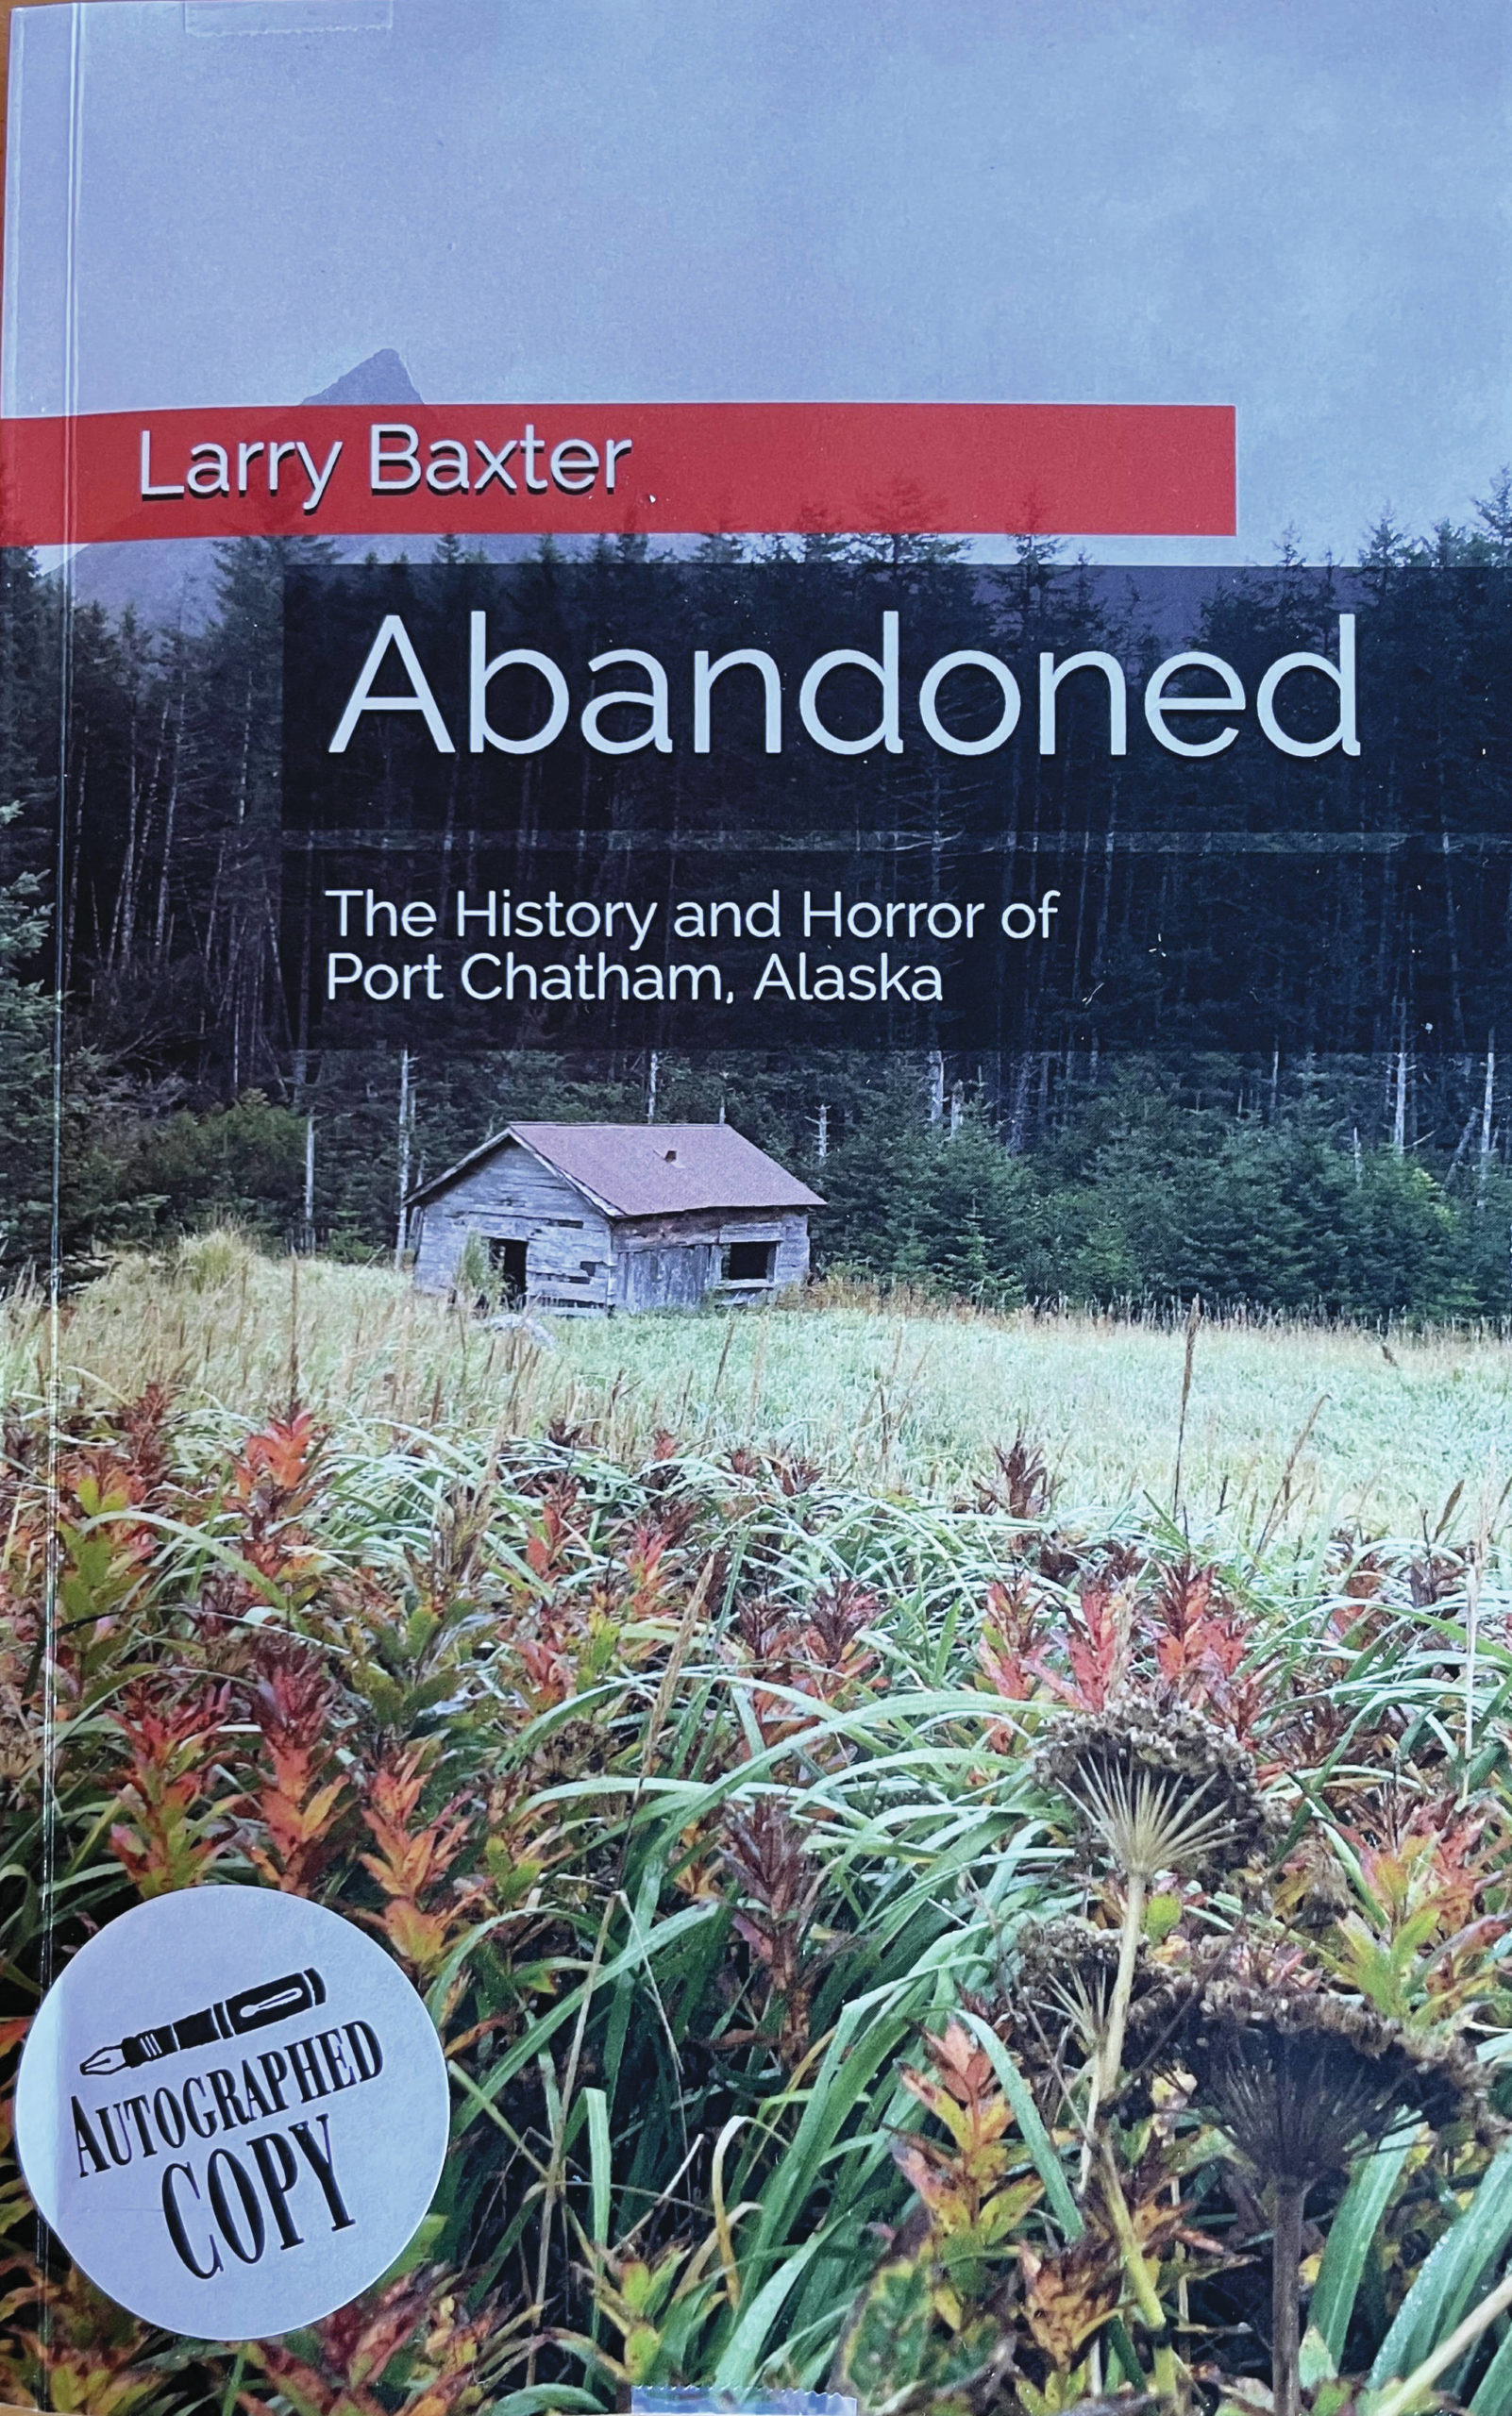 Photo by McKibben Jackinsky 
The cover of Larry Baxter’s book, “Abandoned.”